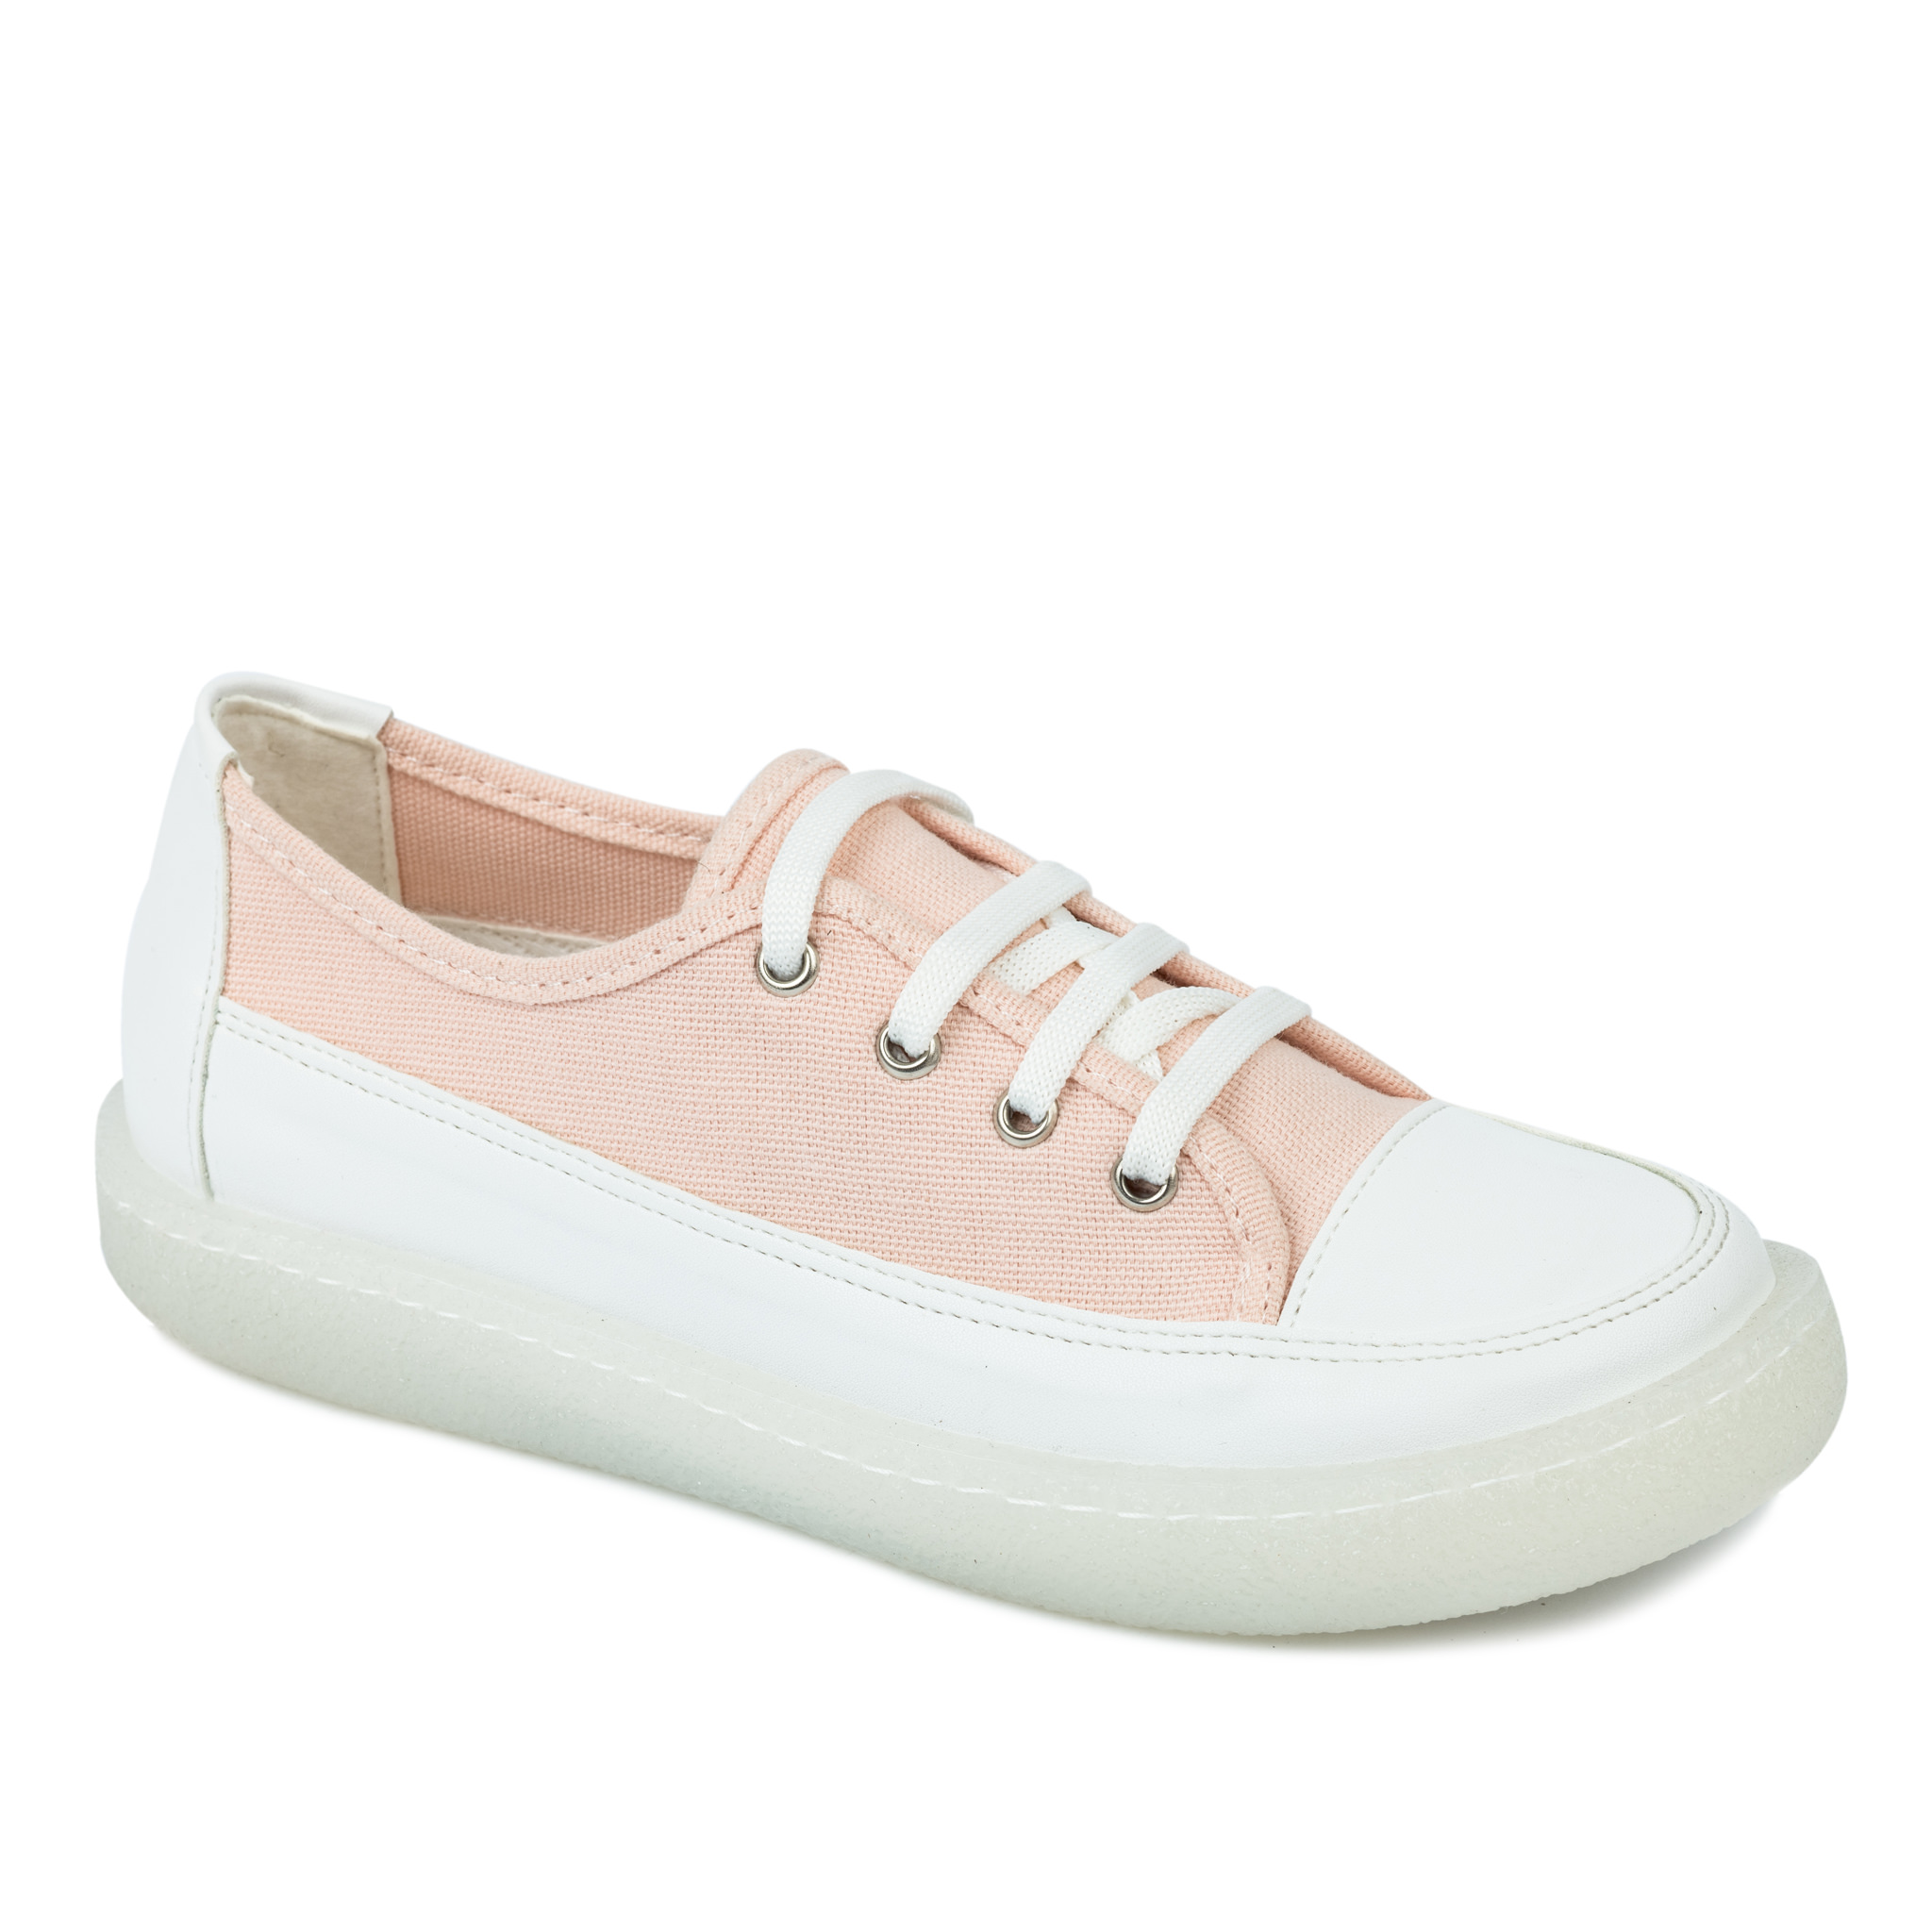 SNEAKERS WITH HIGH SOLE - ROSE